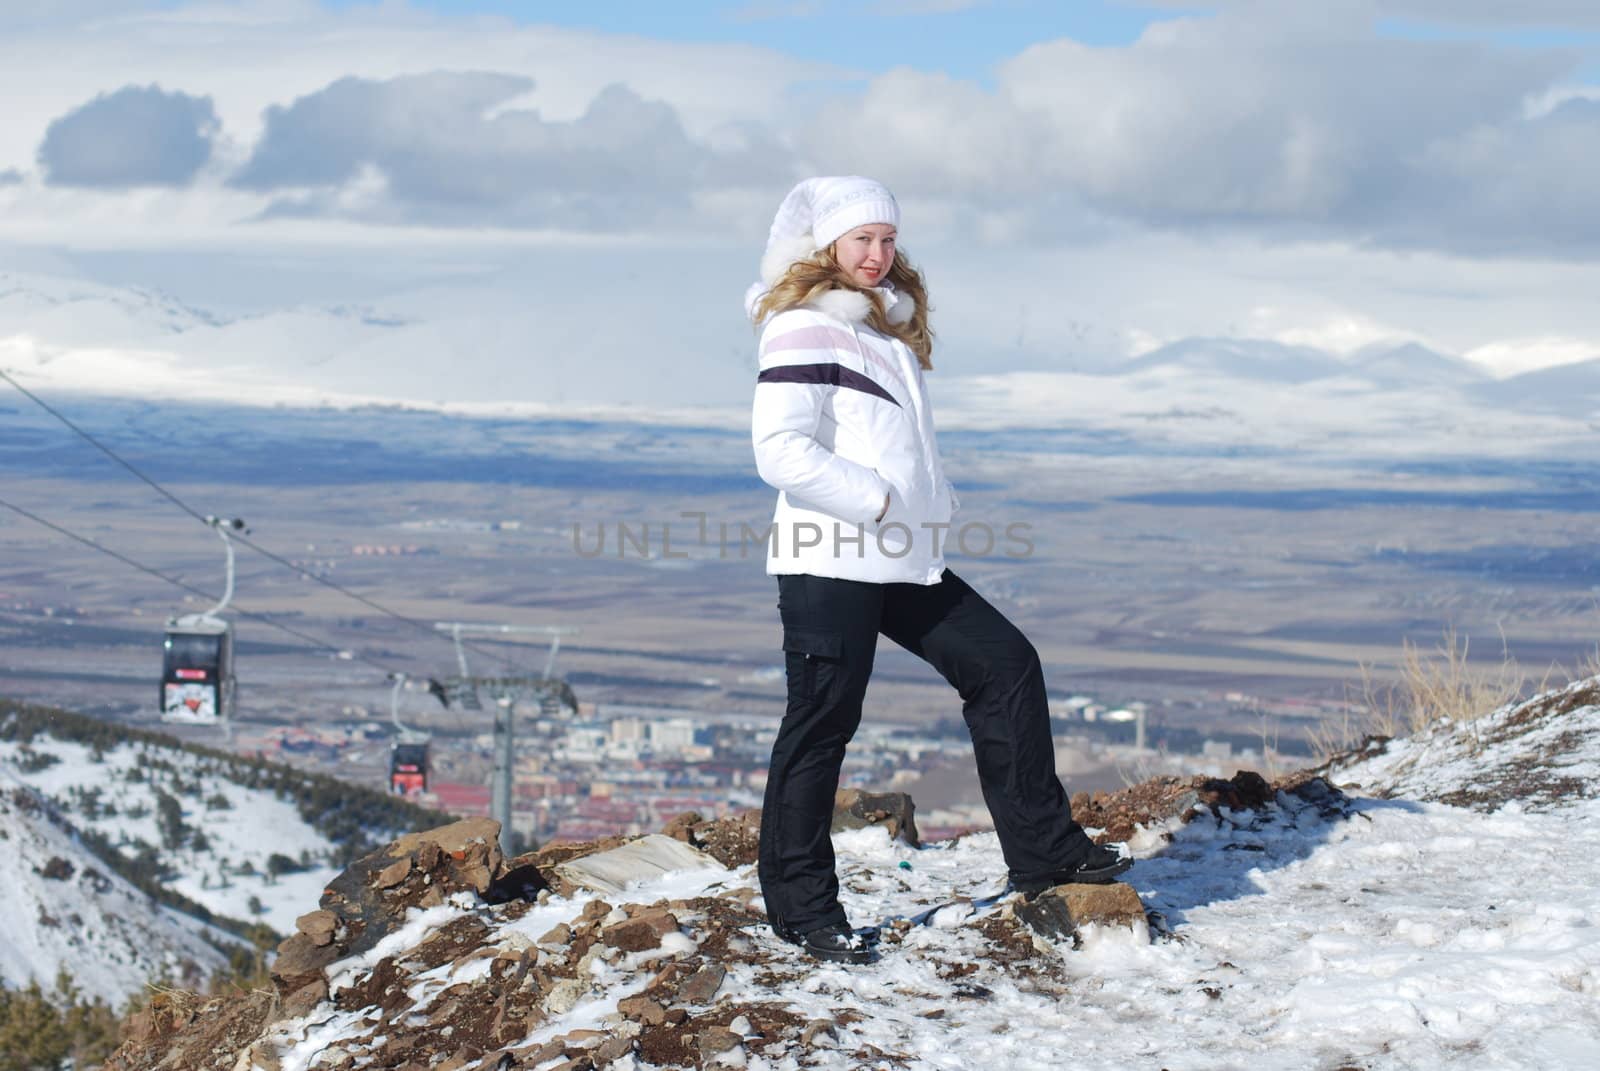 woman snowboarder by svtrotof